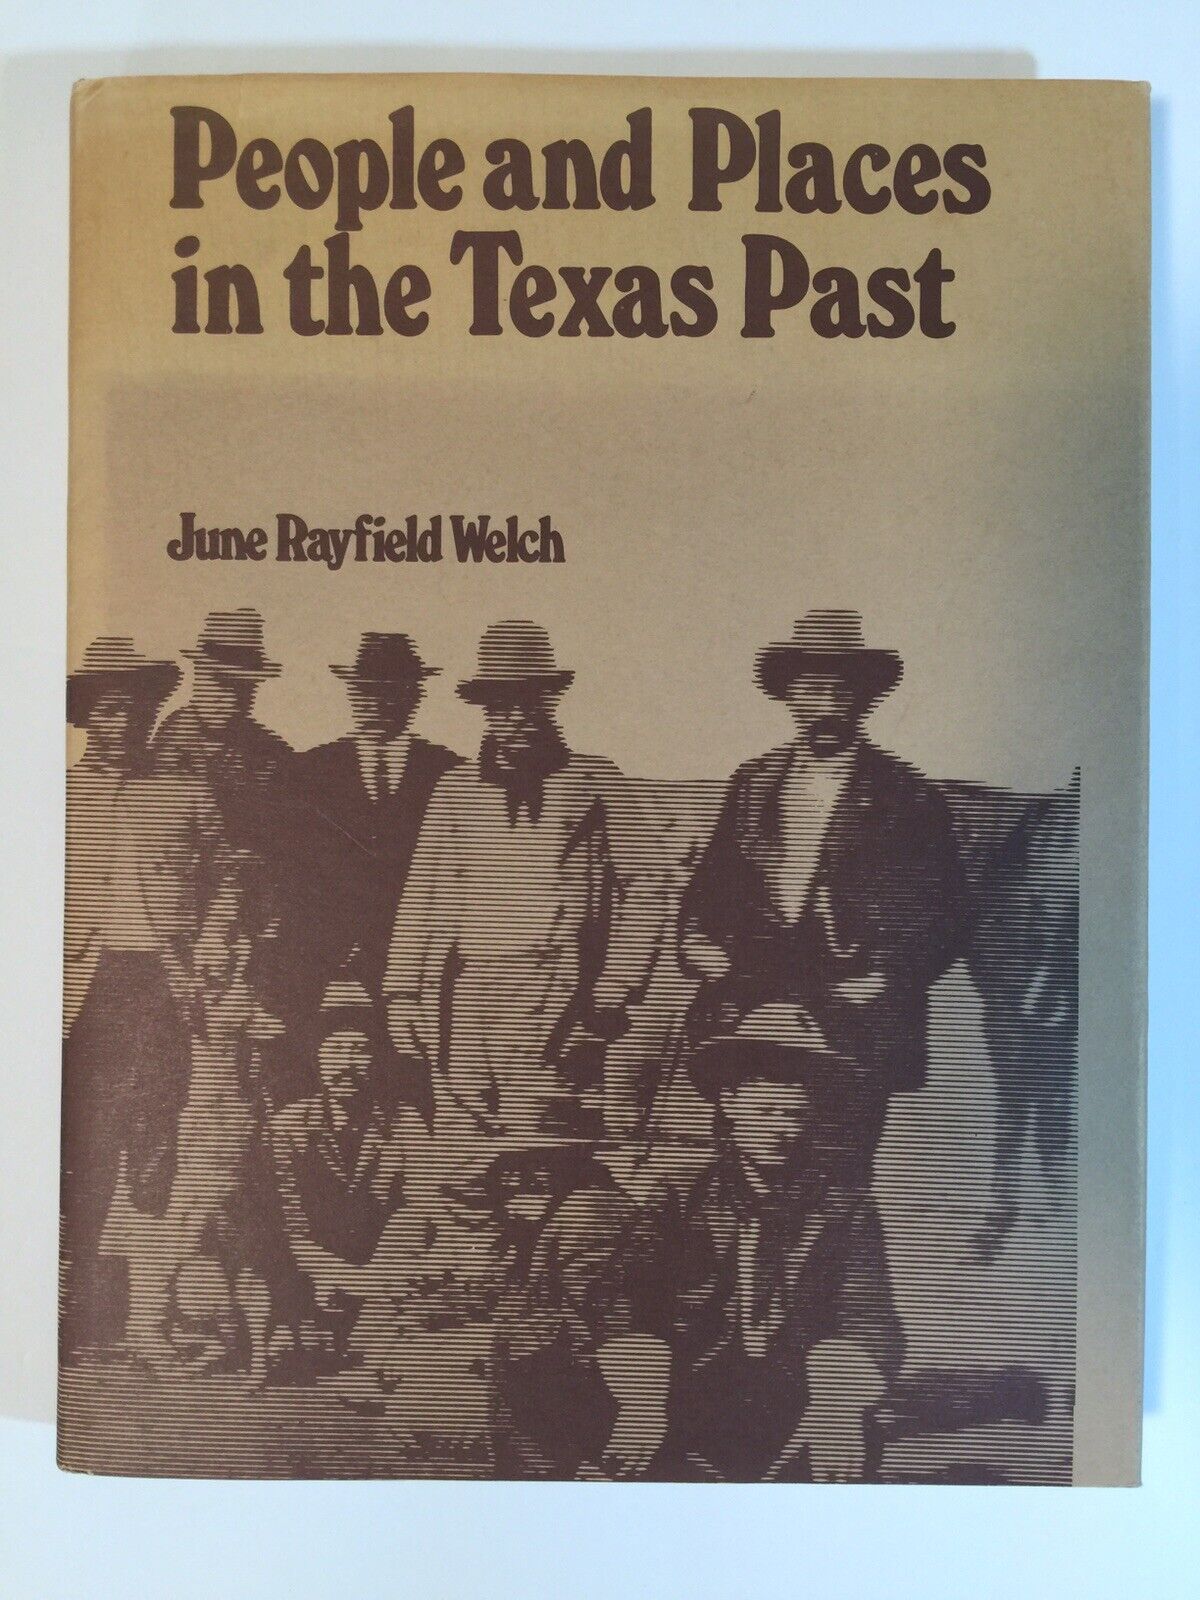 People and Places in the Texas Past by June Rayfield Welch Signed